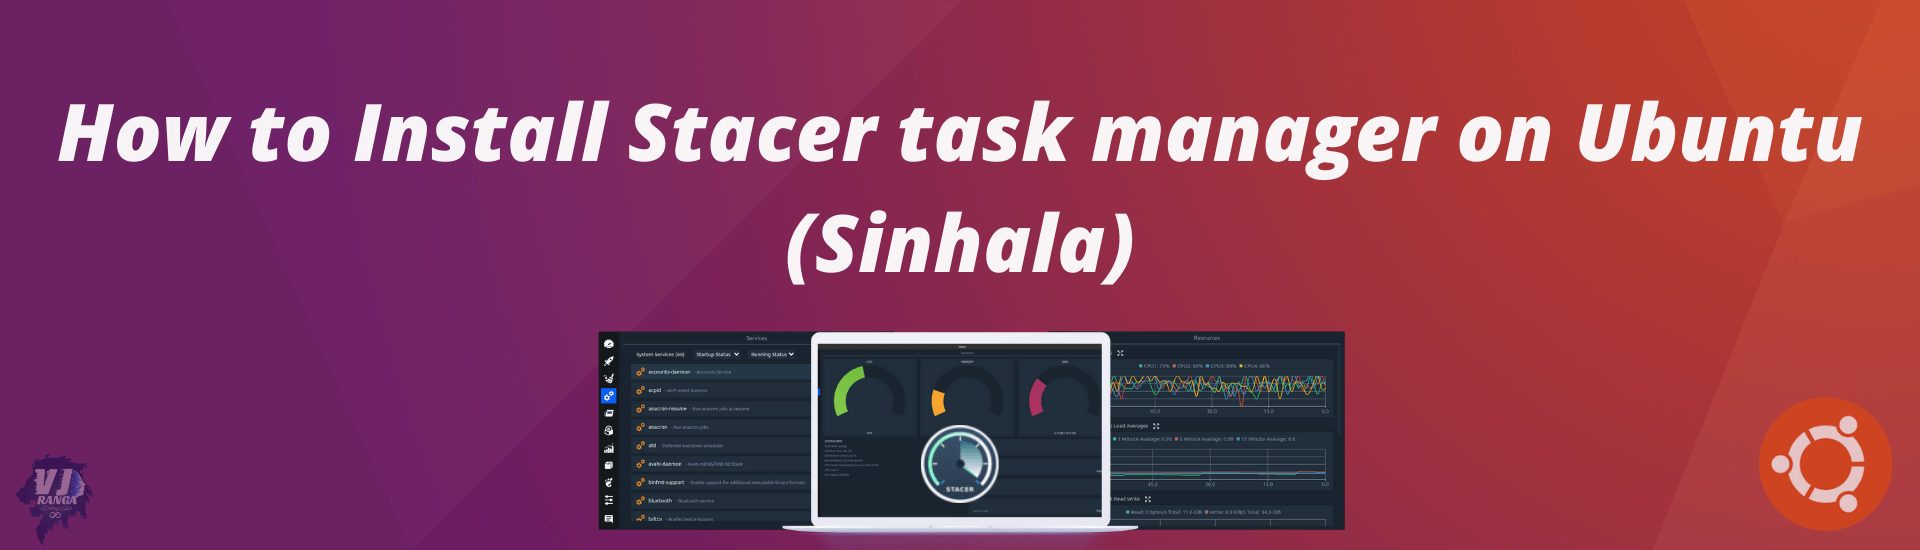 How to Install Stacer task manager on Ubuntu(Sinhala)